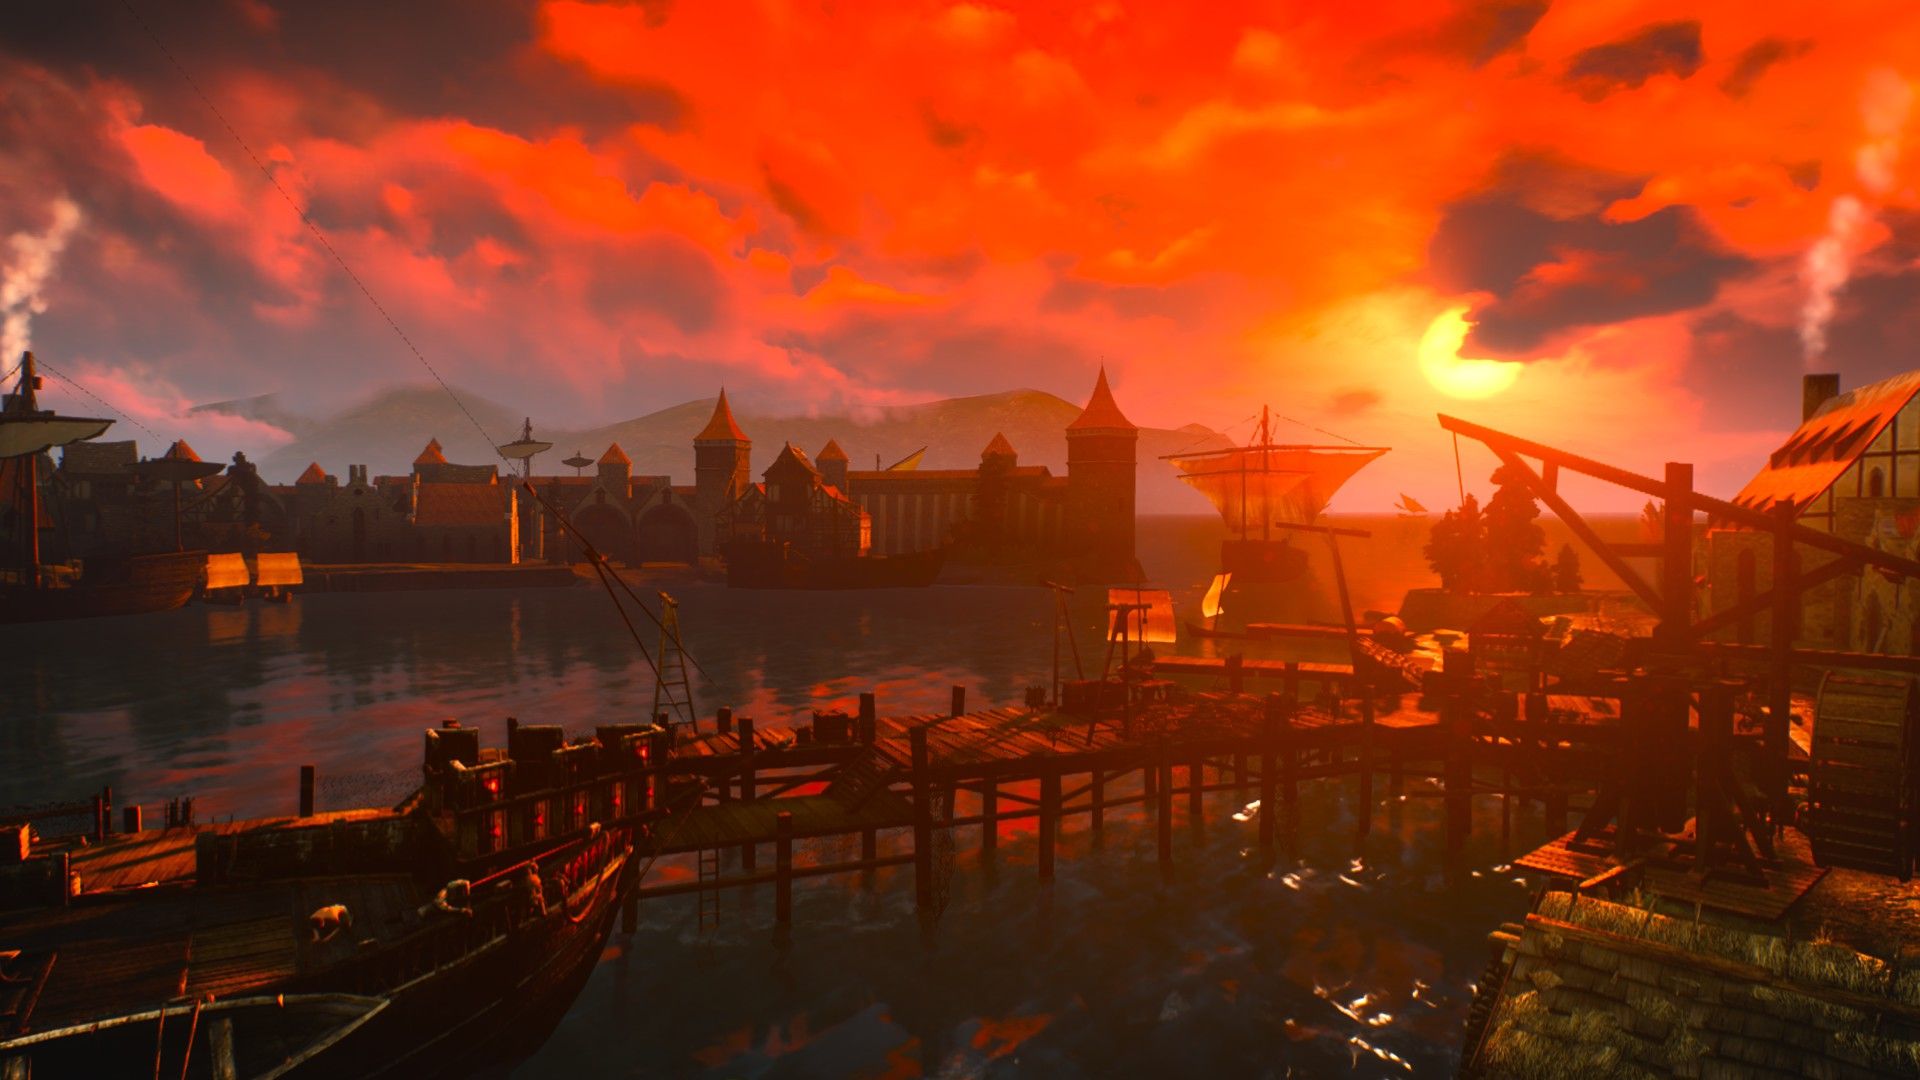 A ship sails out of an medieval city as the evening sun bathes the docks in a deep orange glow.